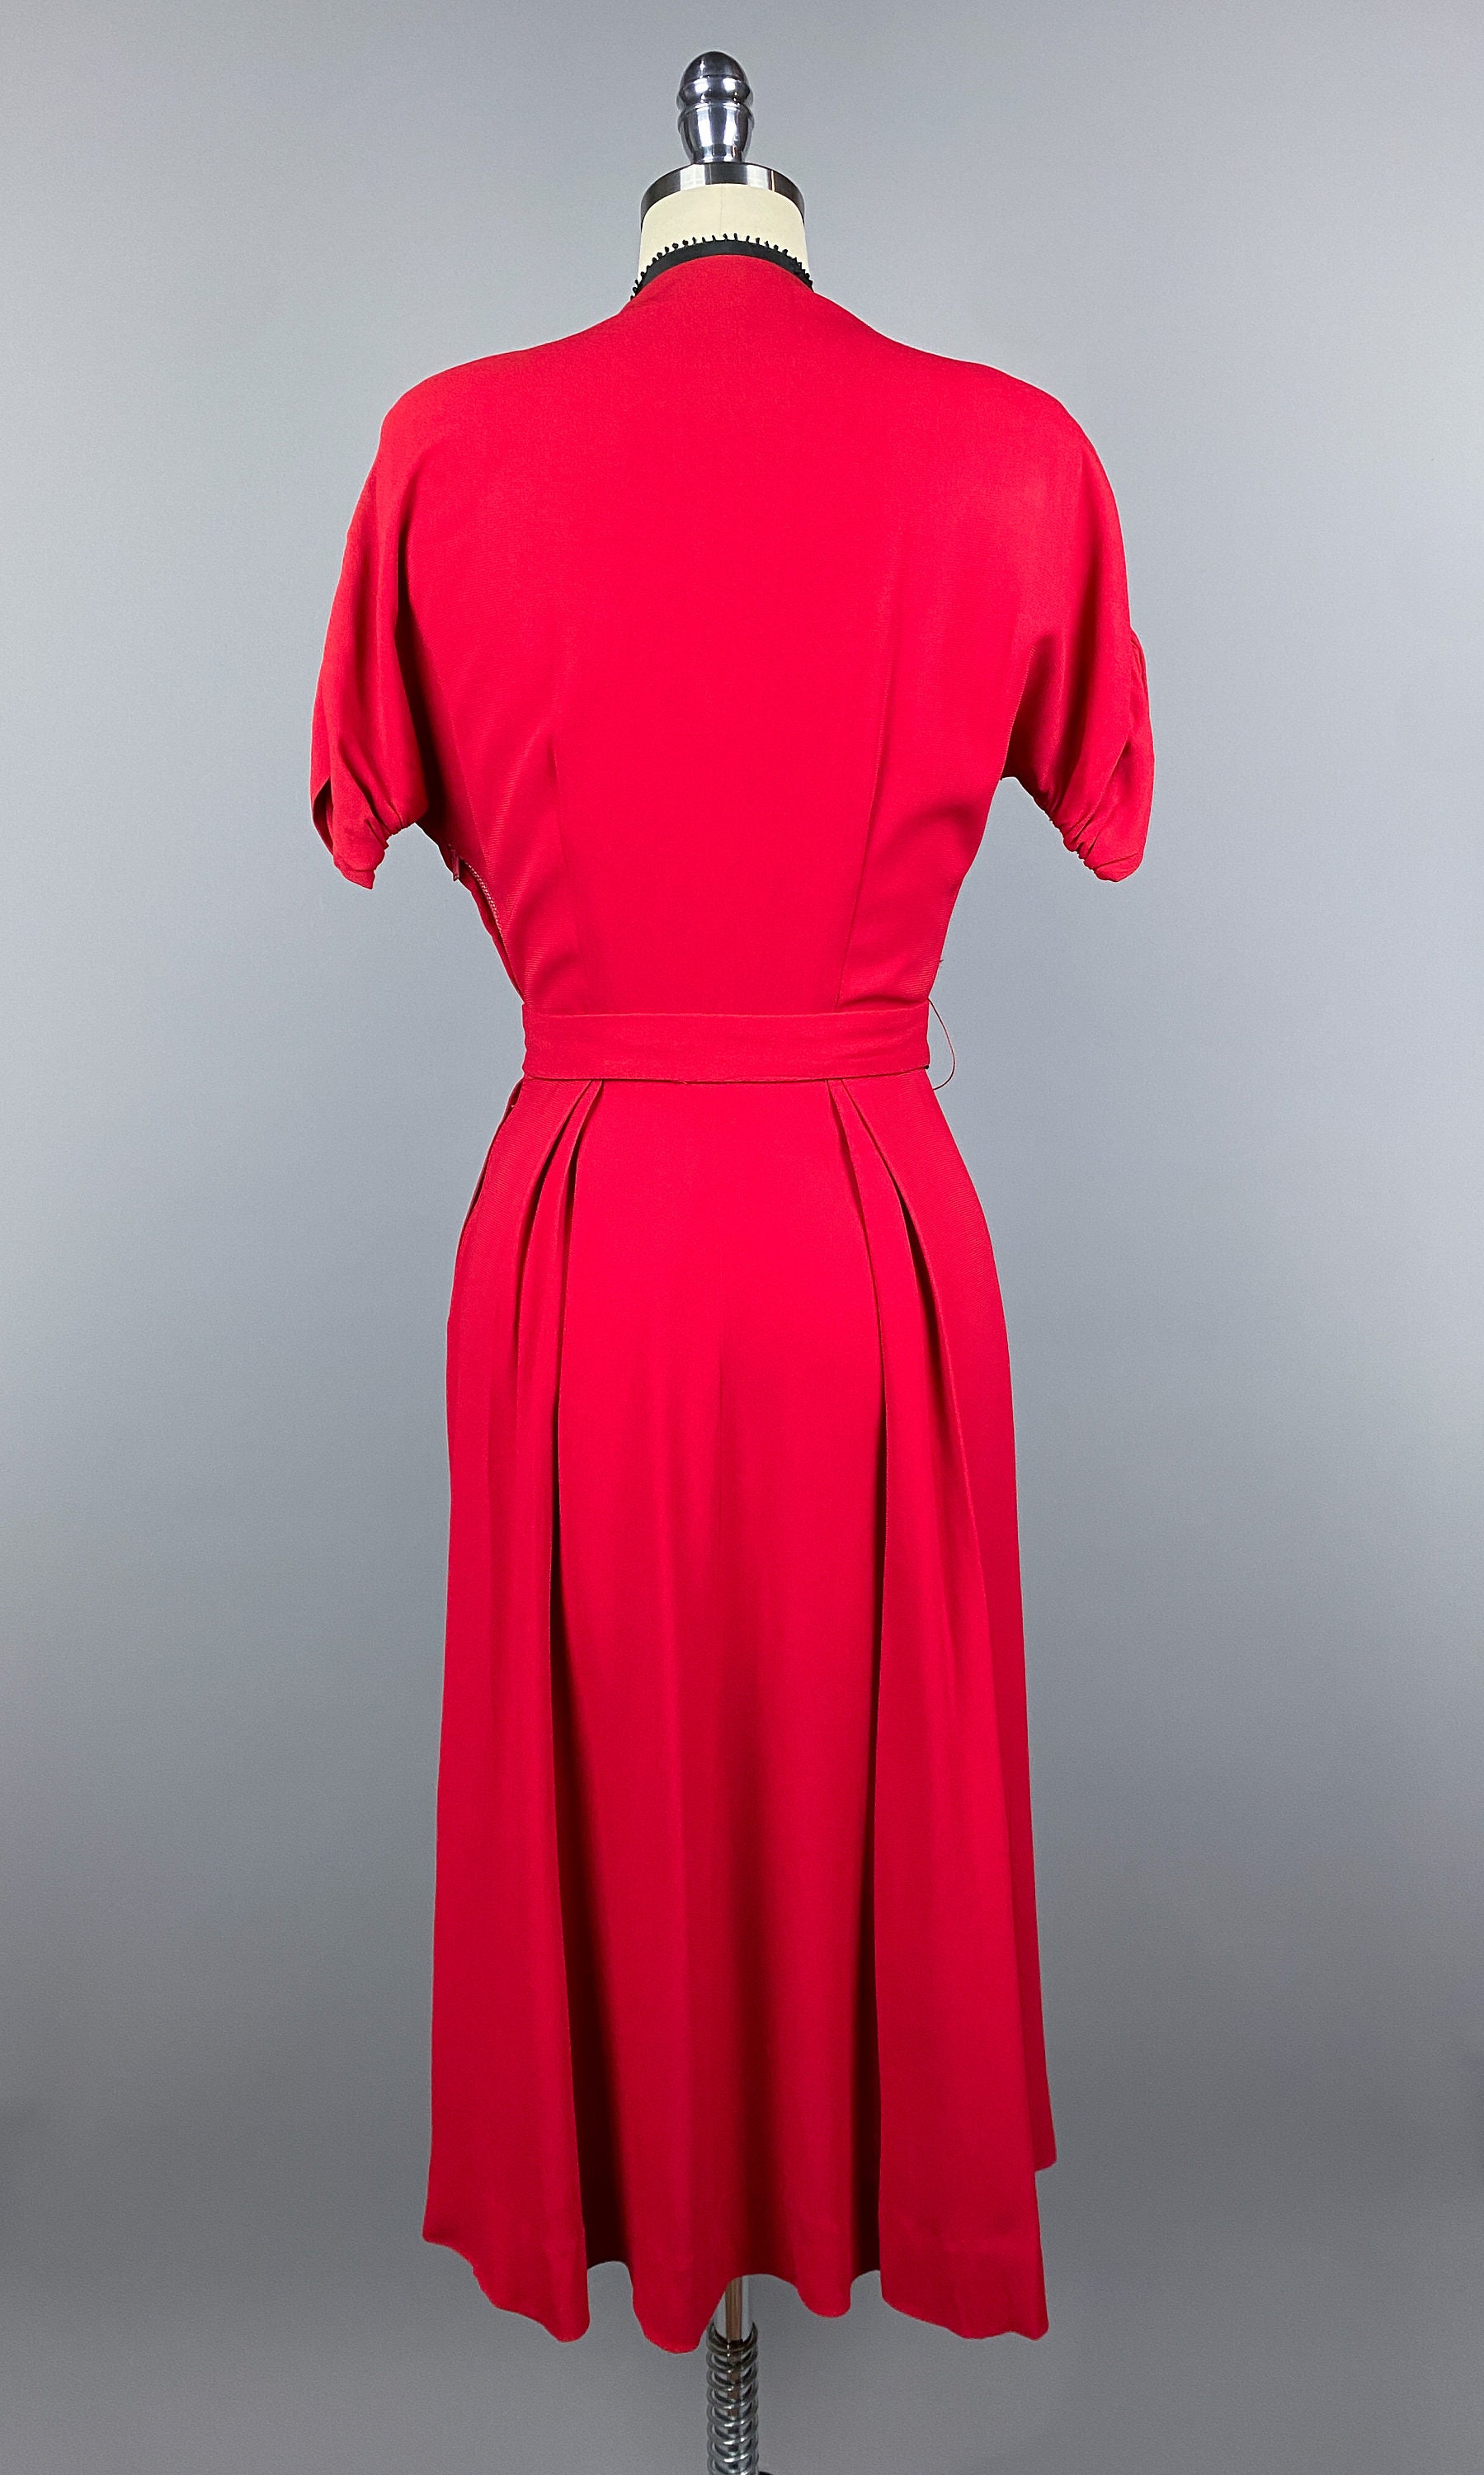 Vintage 1940s Dress by Mary Muffet Small XS 40s Red Rayon - Etsy